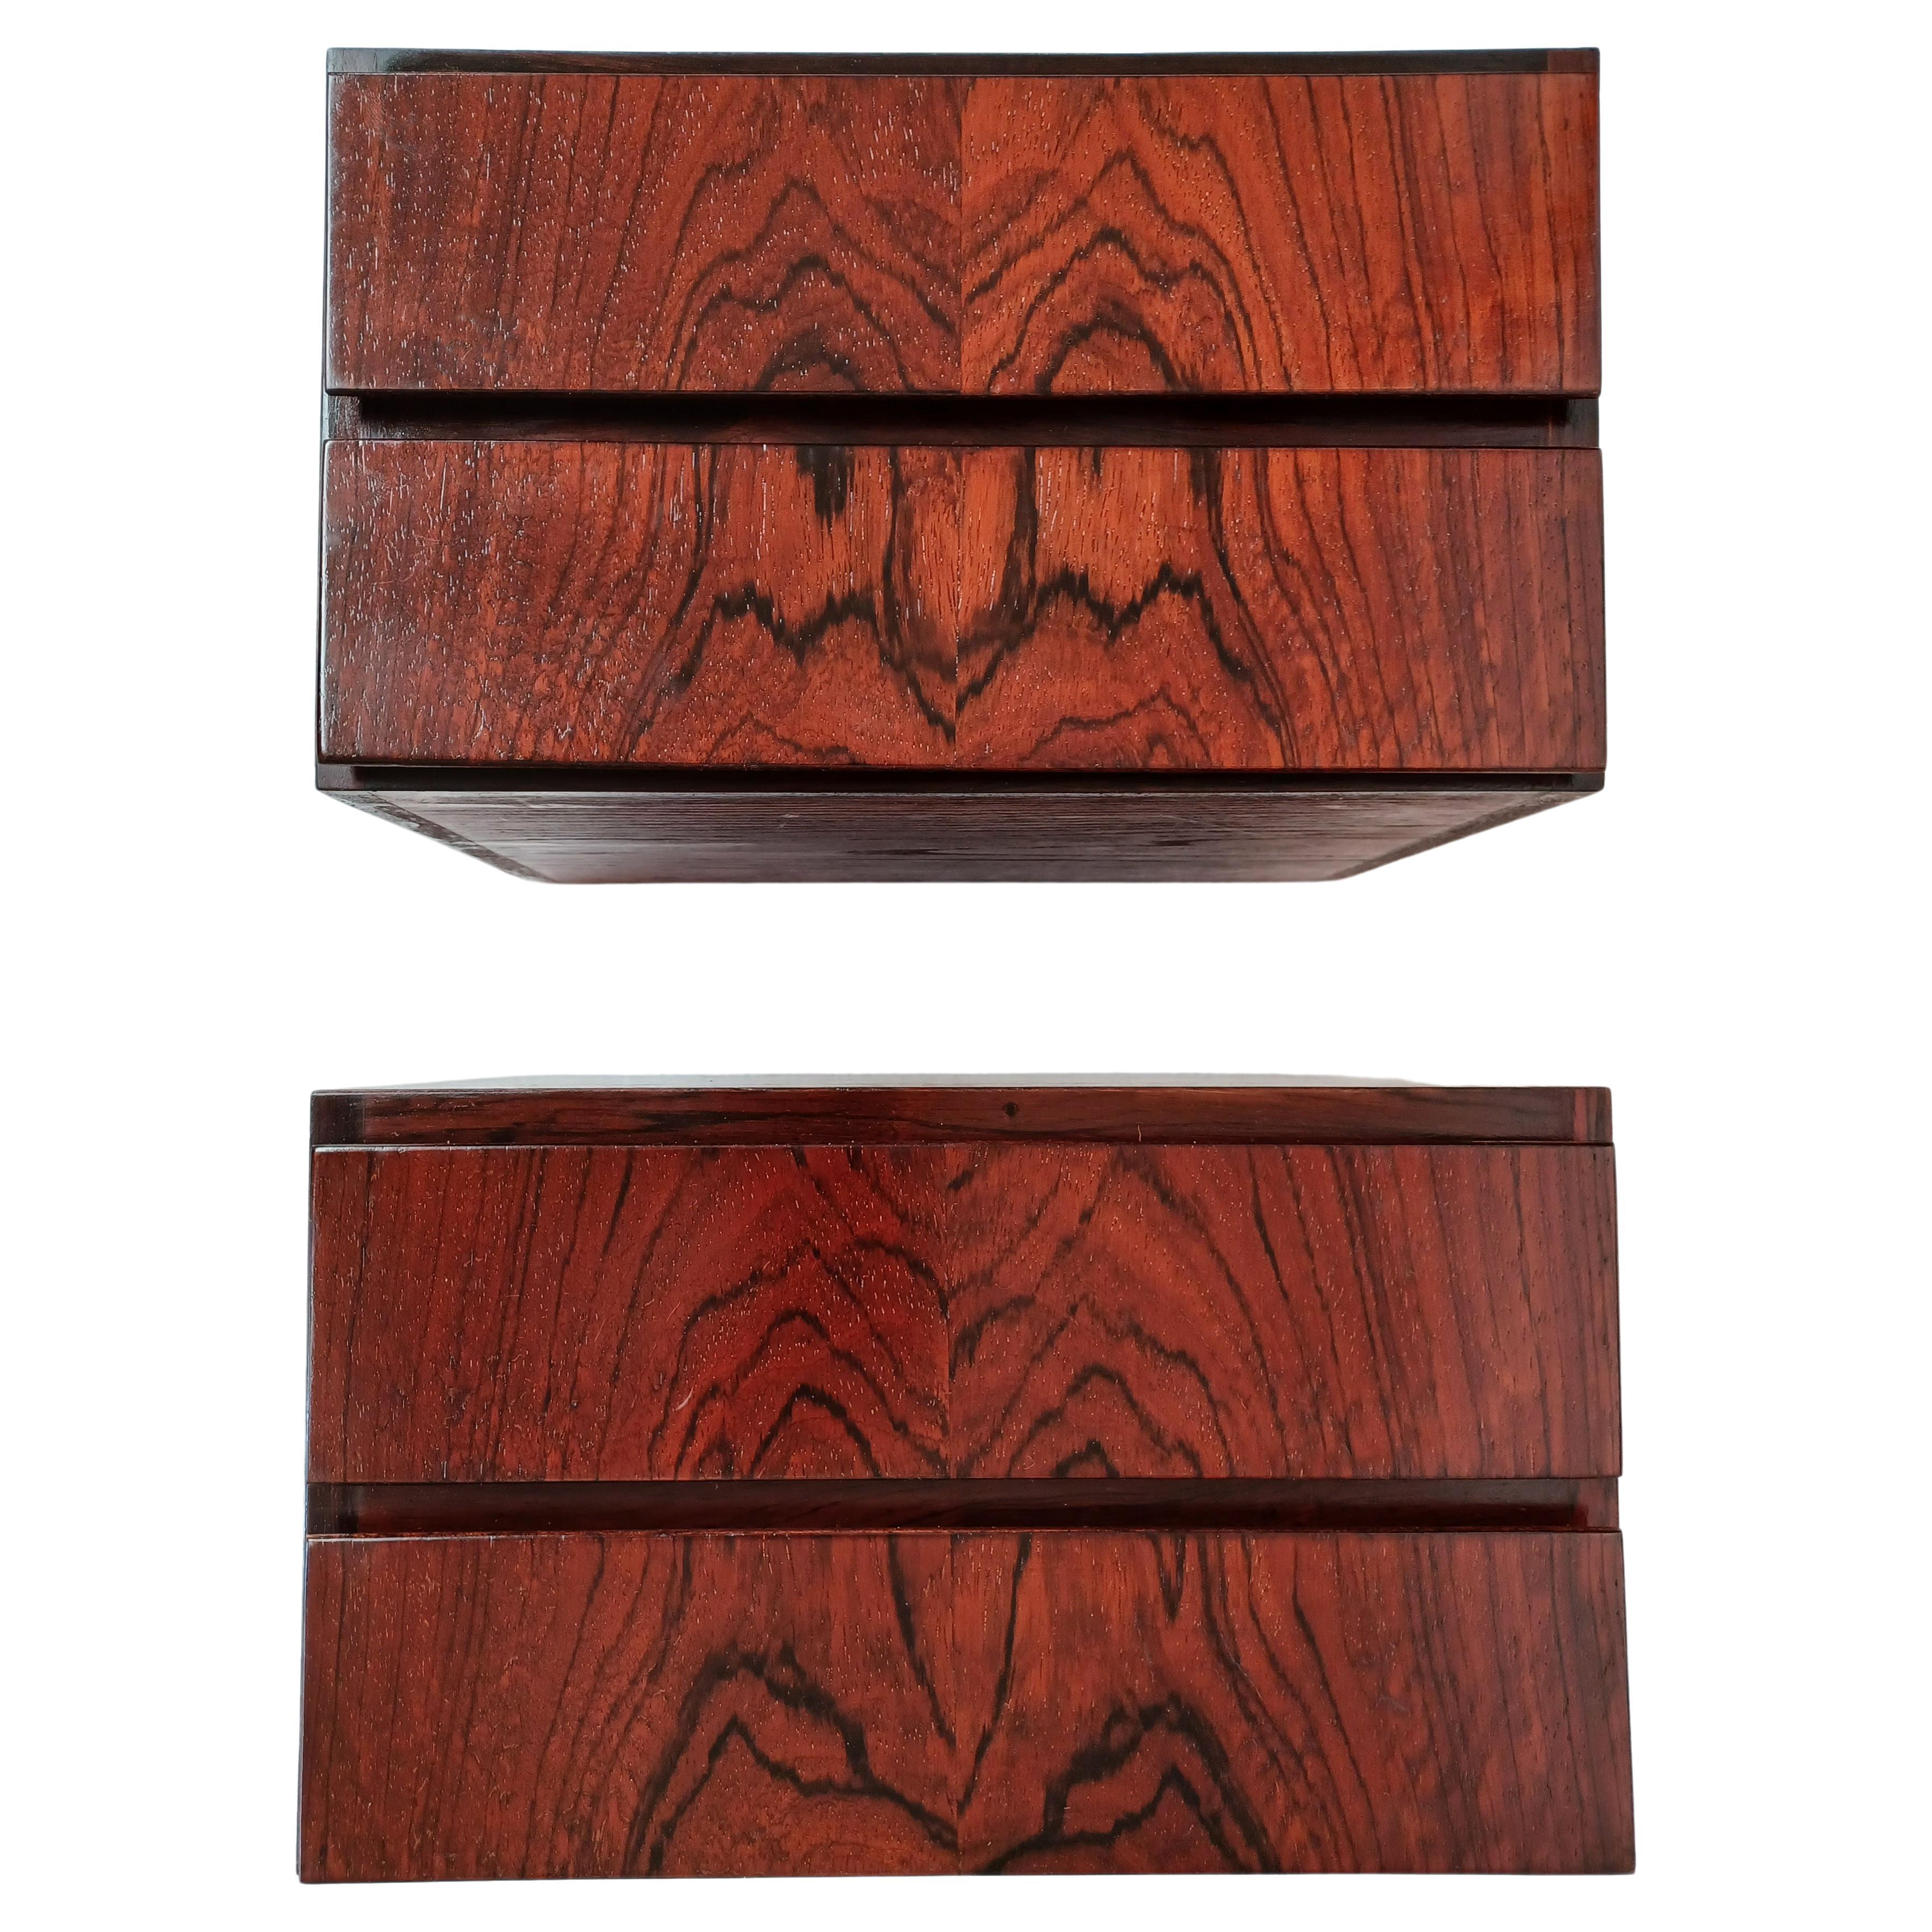 1960s set of two fully restored Danish floating rosewood night stands attributed to Omann Jun

The nightstands combination of a strict minimalistic designed cabinet softend by the organic skaped grips in the drawers and dimensions create a uniqe